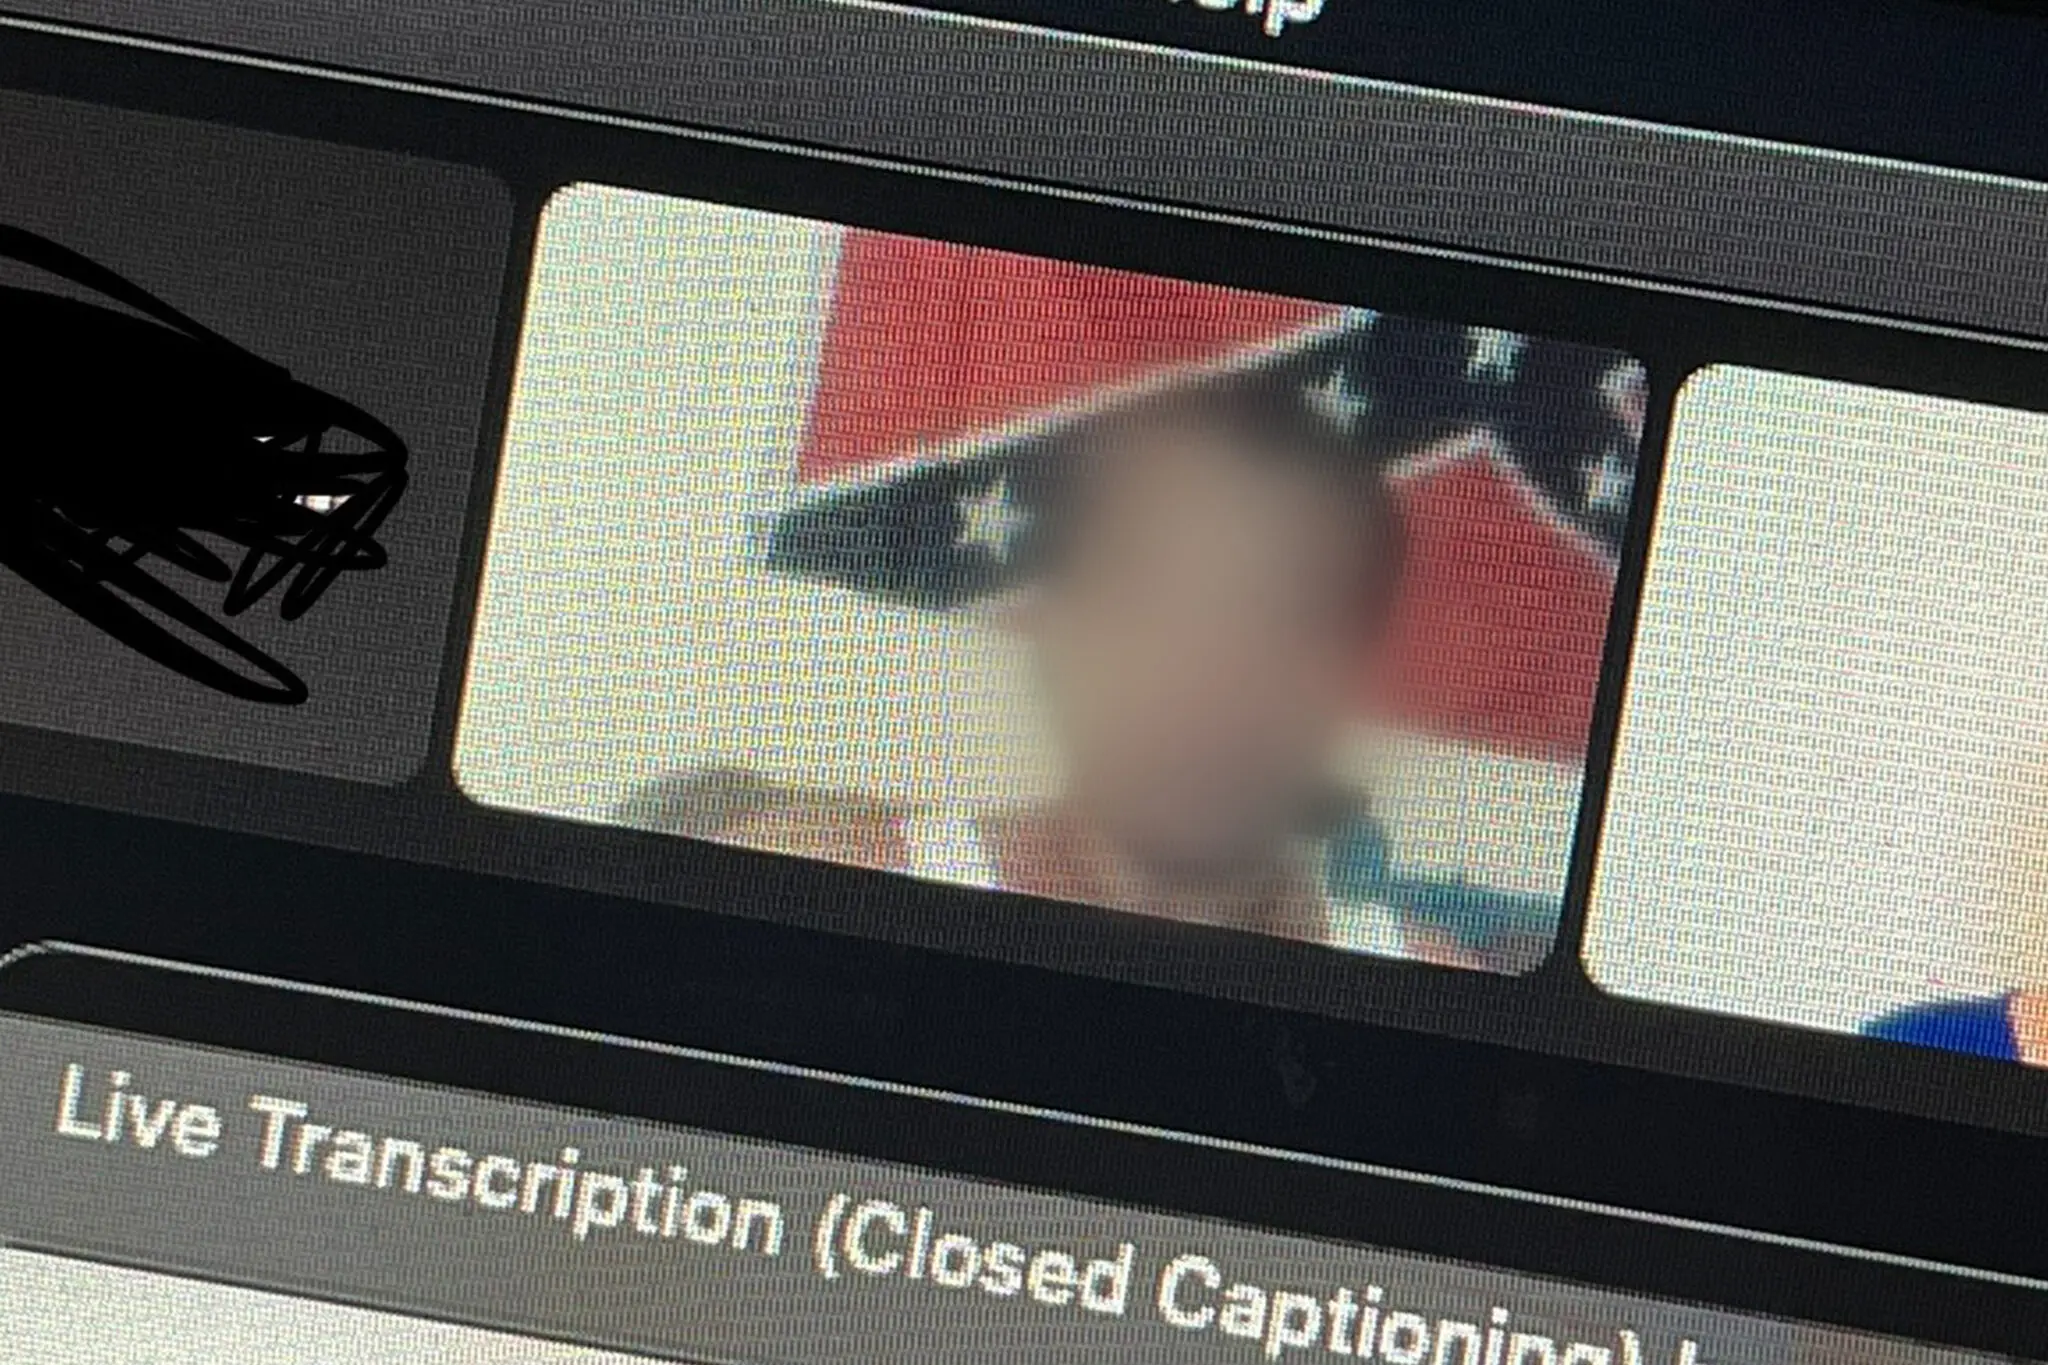 New Houston Methodist employee reprimanded for showing confederate flag during virtual orientation